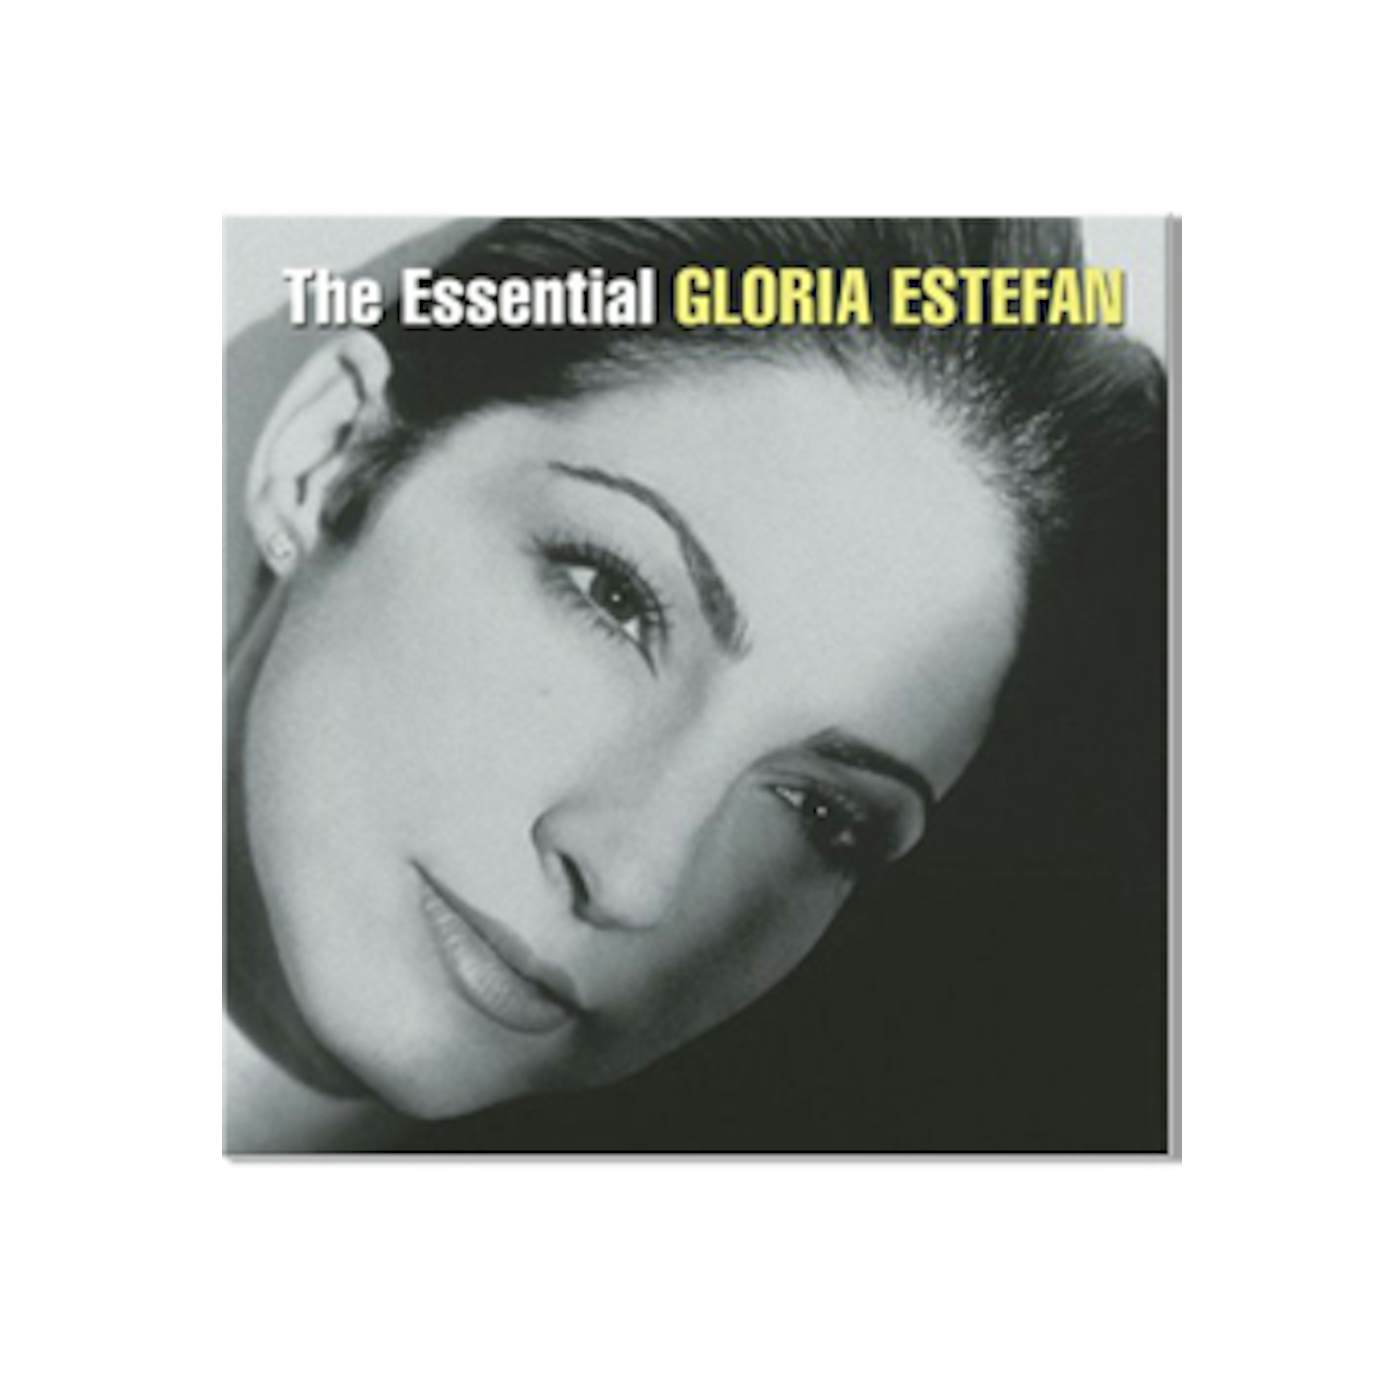 ON YOUR FEET: THE STORY OF EMILIO & GLORIA On Your Feet The Essential Gloria Estefan CD